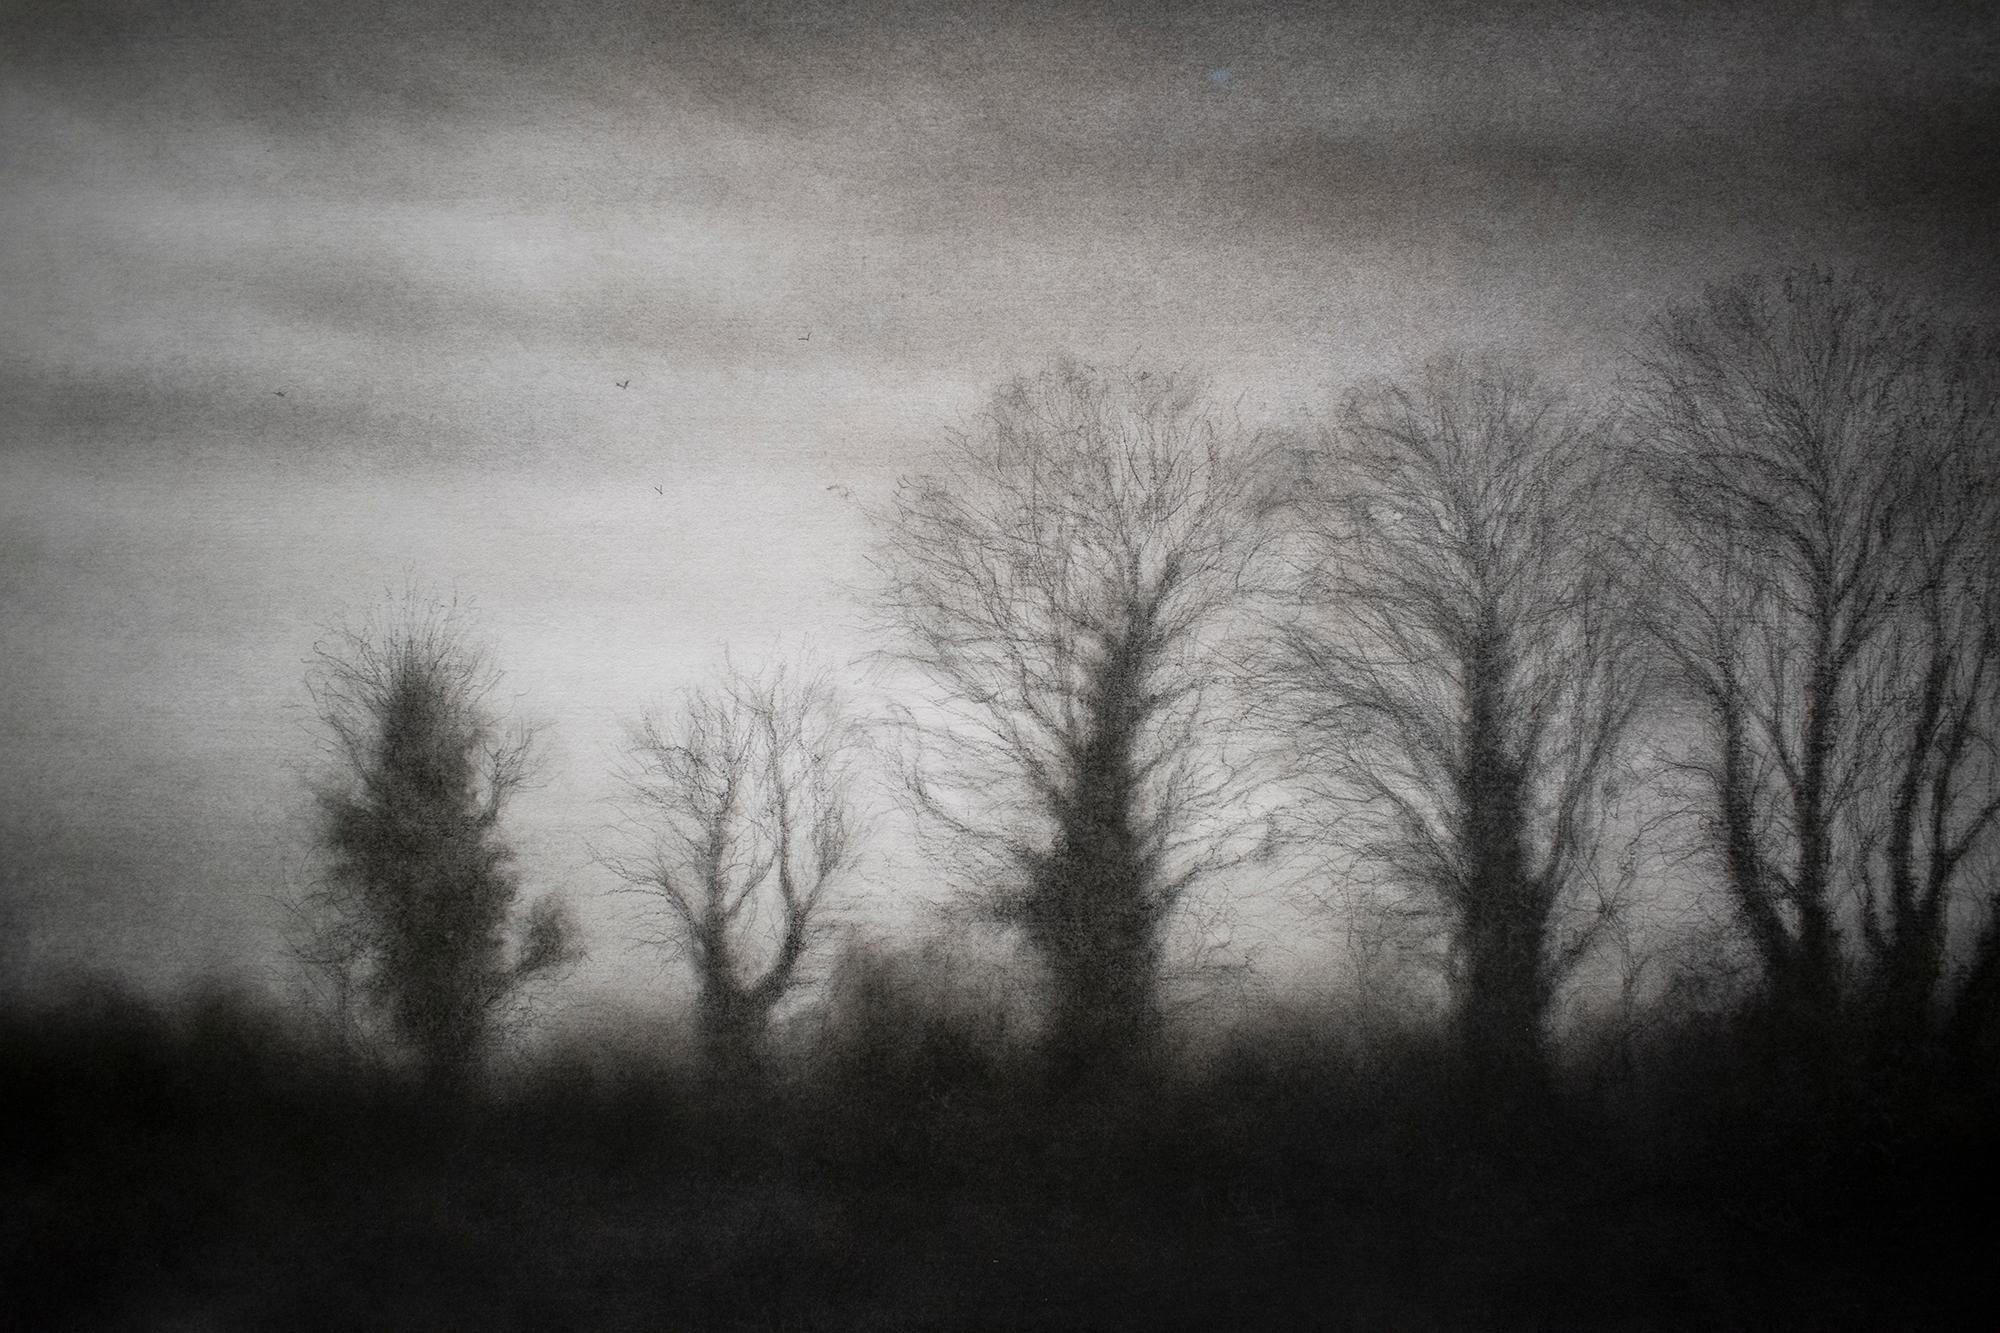 Anthem III (Realistic Black Charcoal Landscape Drawing of a Country Forest) - Contemporary Art by Sue Bryan